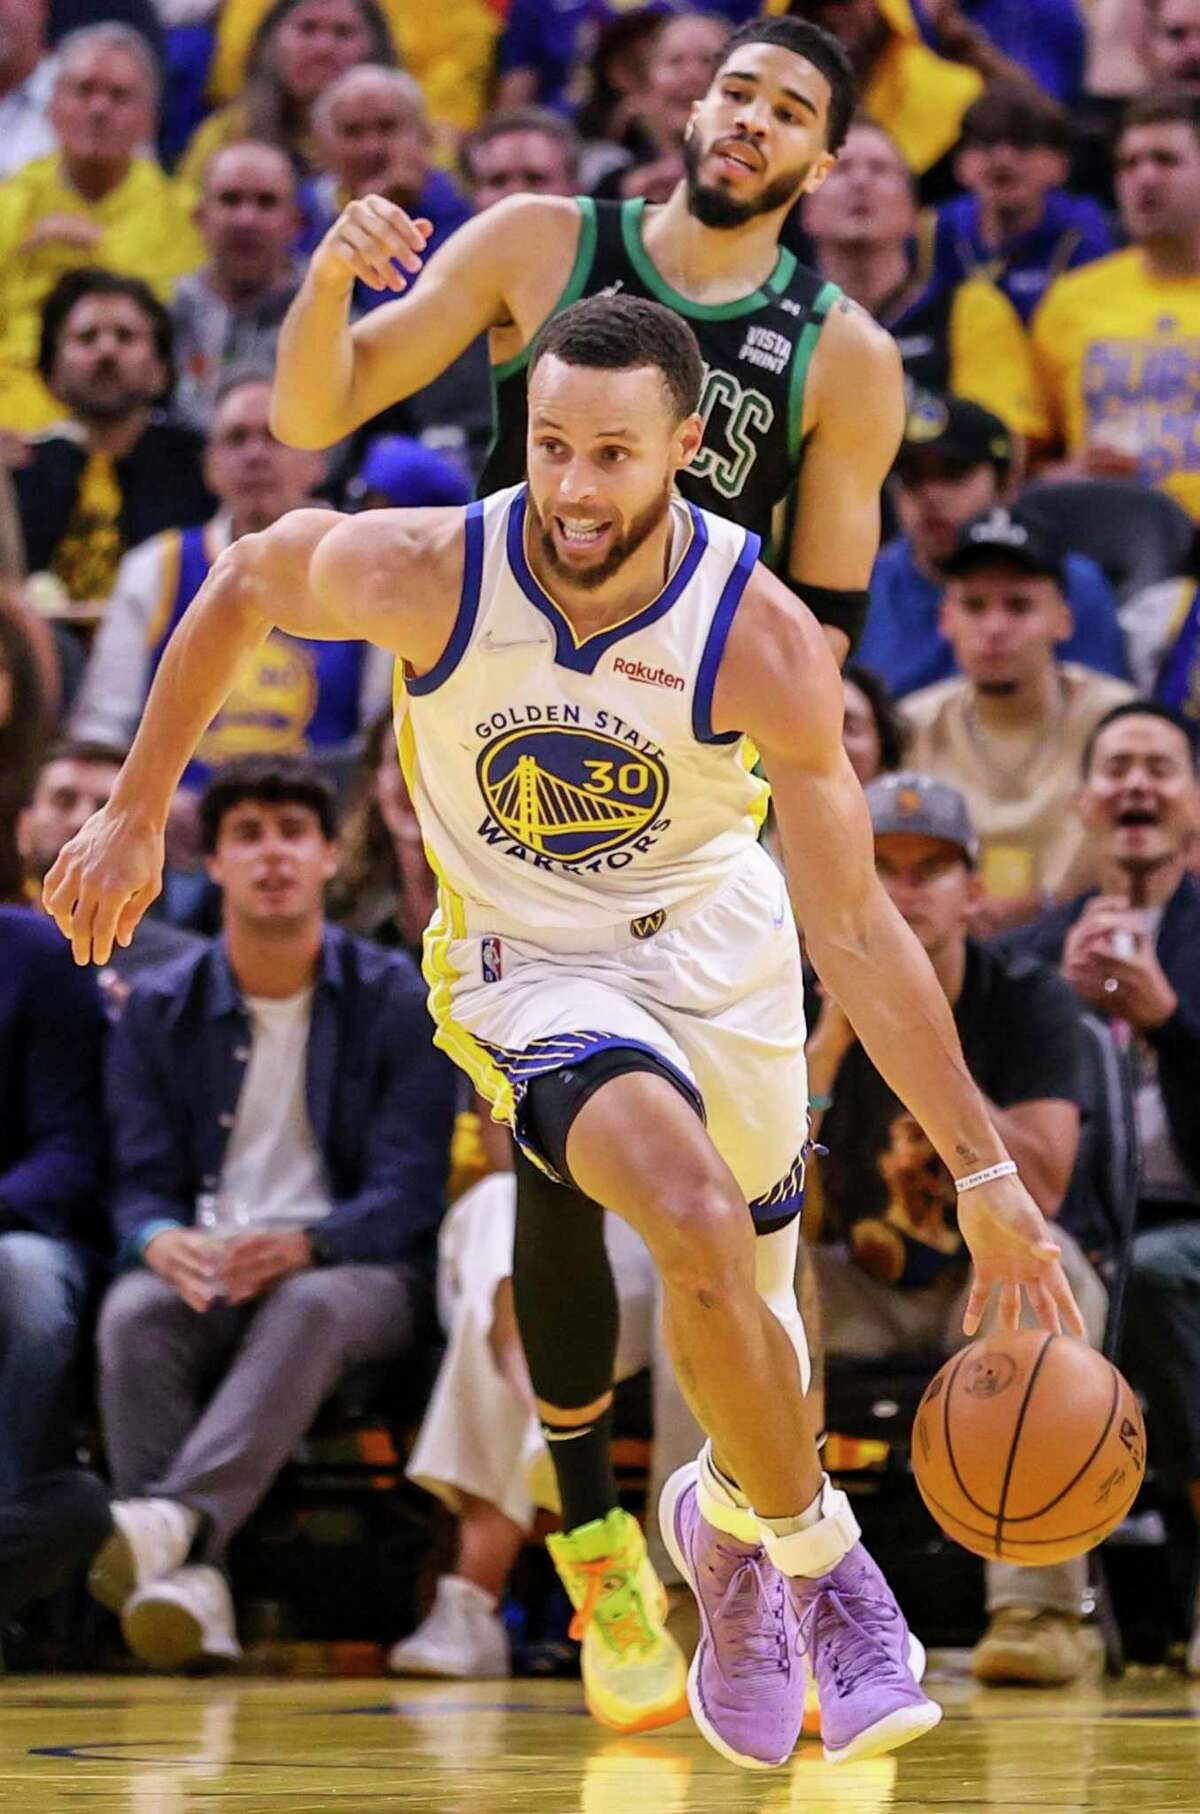 Golden State Warriors' Stephen Curry, 30, heads up court during the third quarter in Game 5 of the NBA Finals at Chase Center in San Francisco, Calif., on Monday, June 13, 2022.